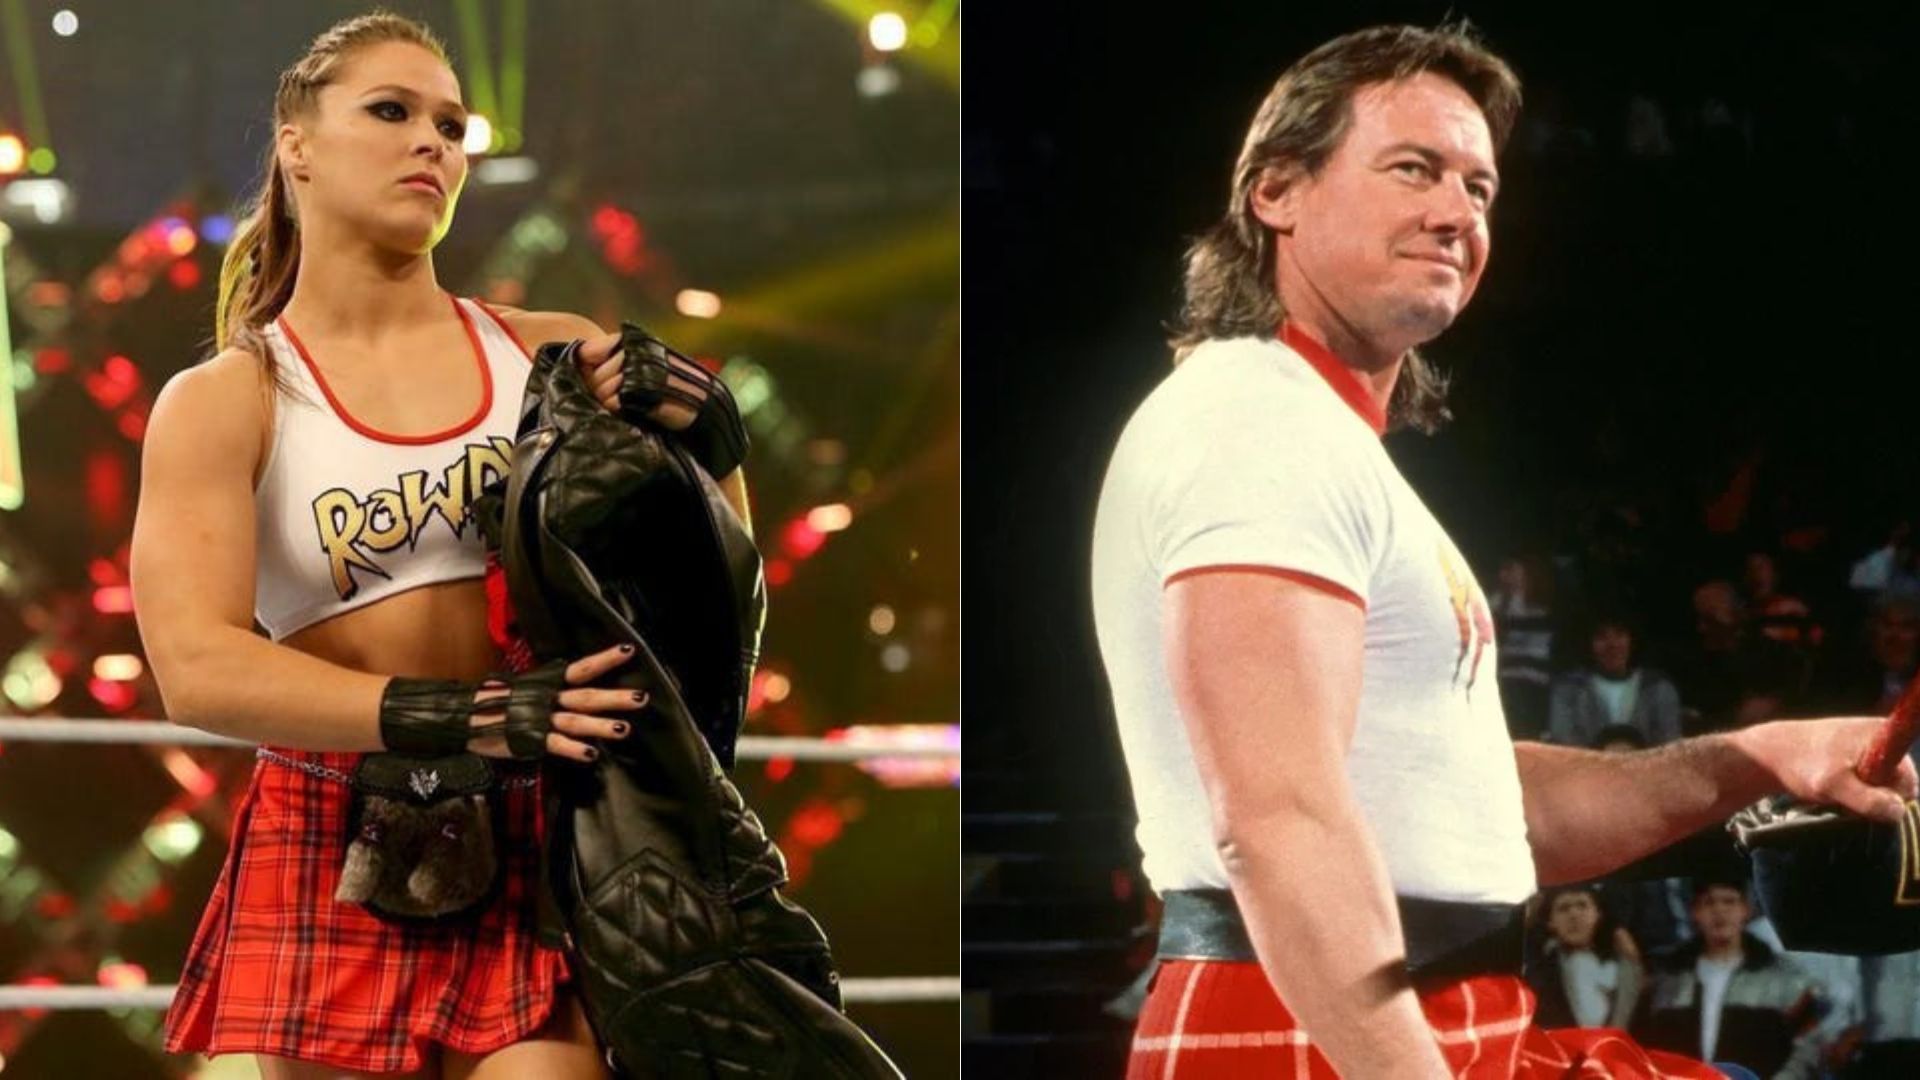 Ronda Rousey (left) and Roddy Piper (right)